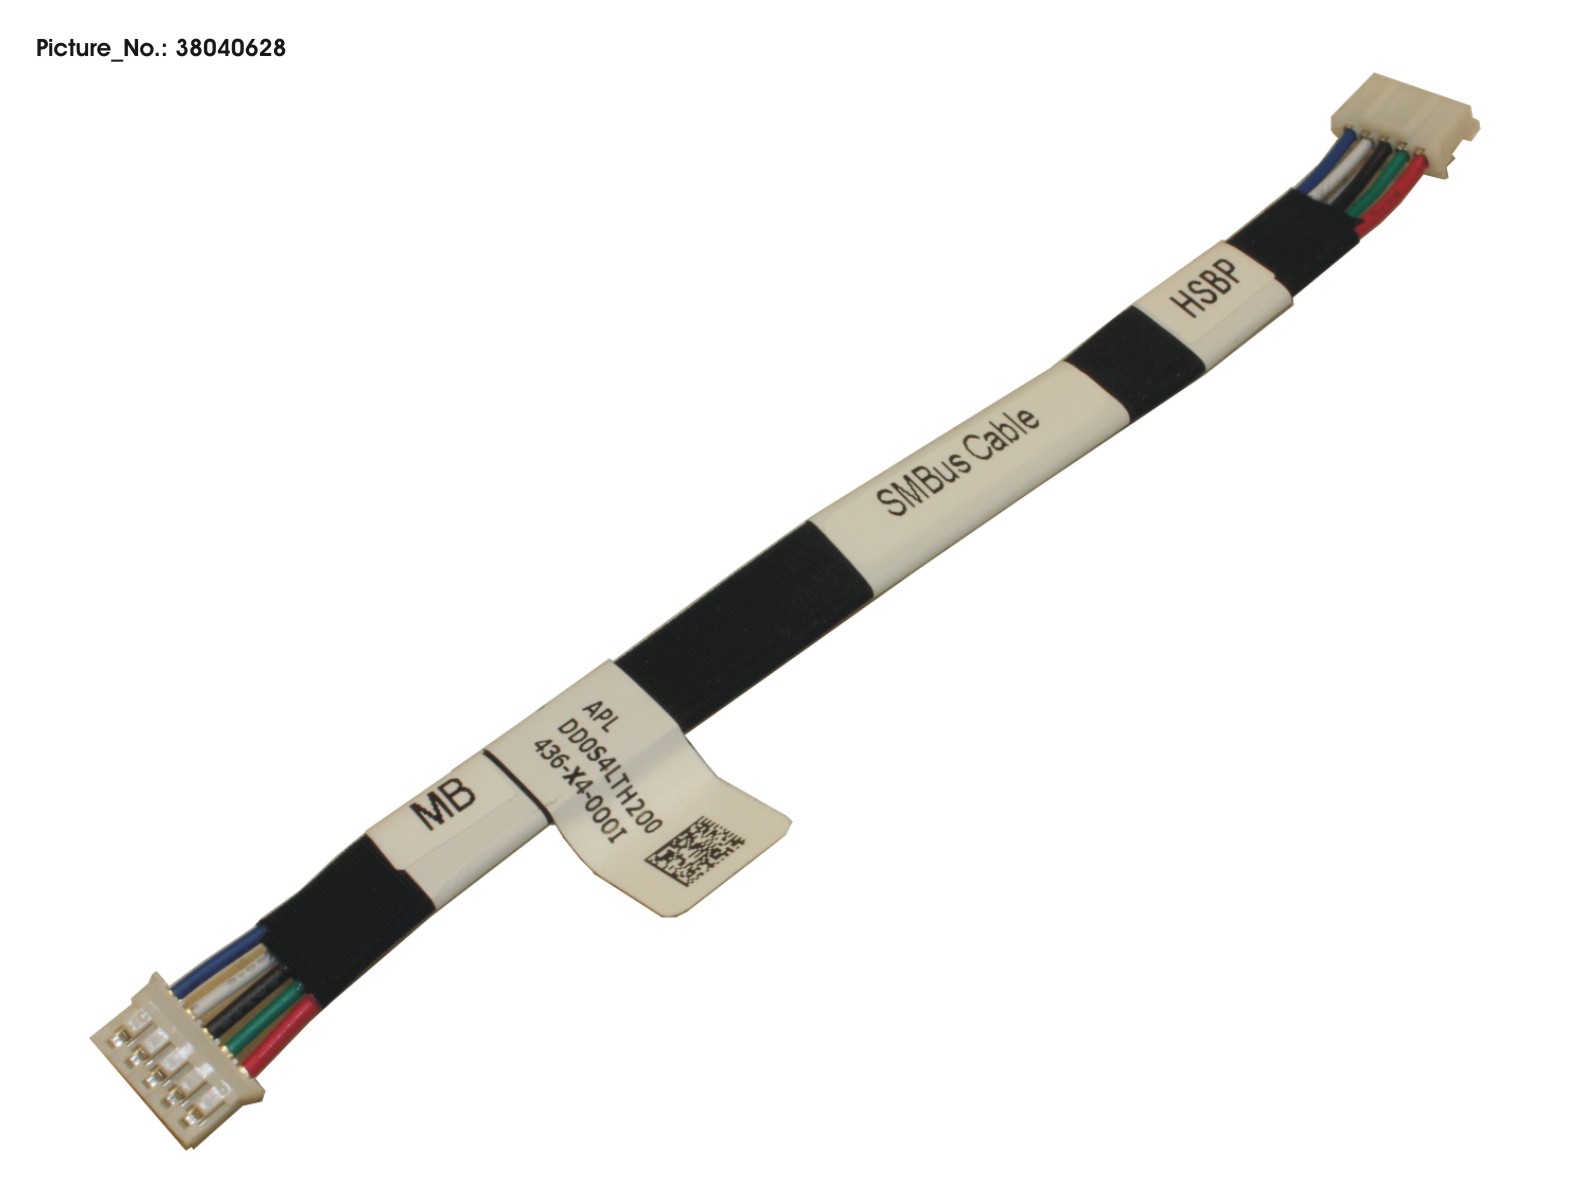 CBL HDD SMBUS CABLE